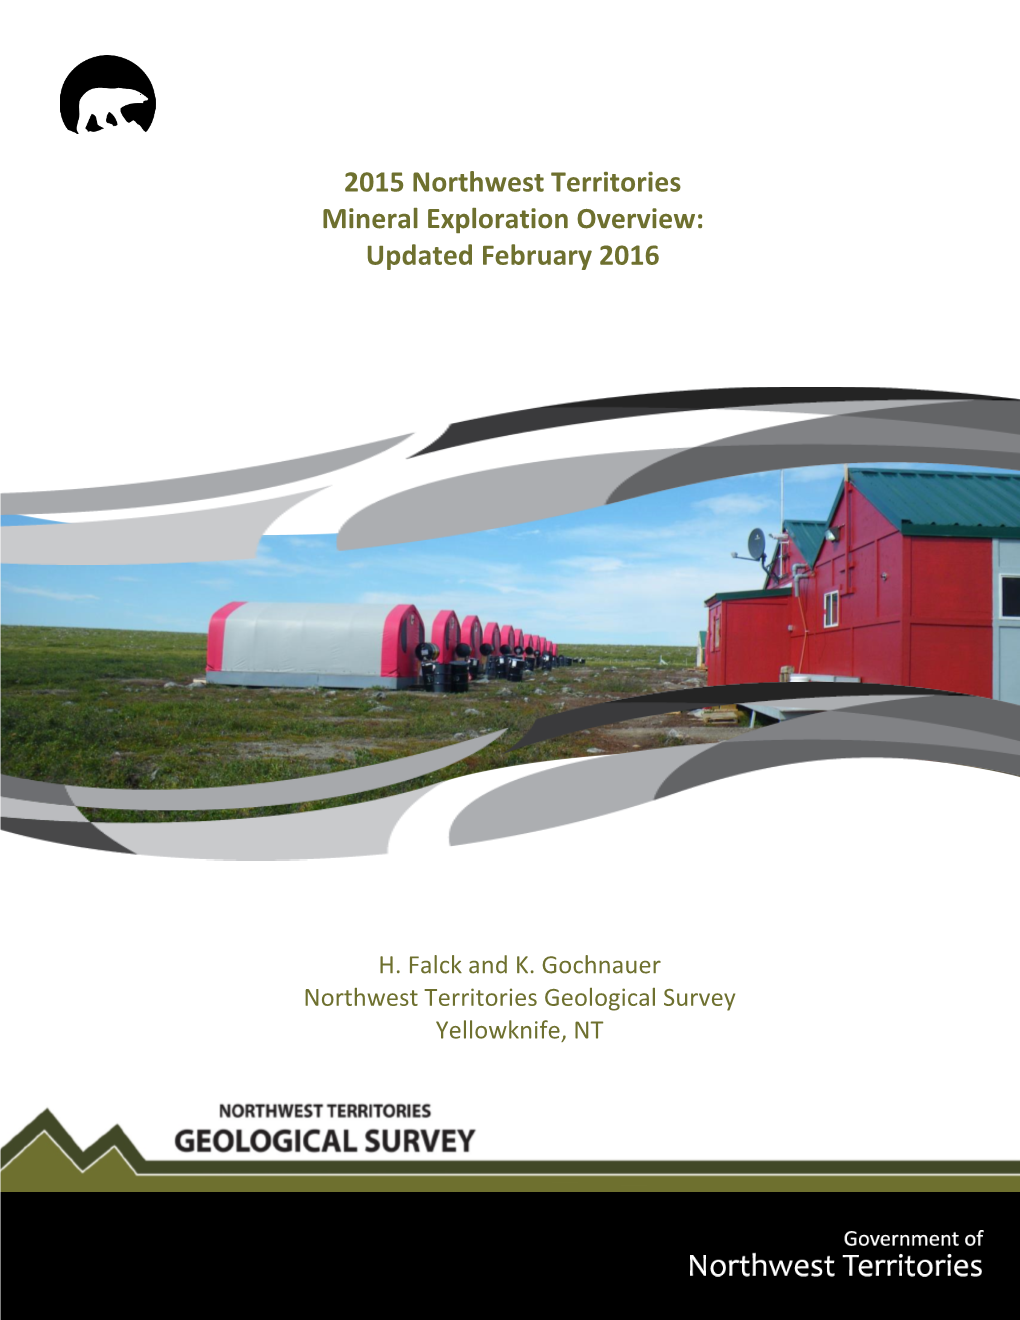 2015 NWT Mineral Exploration Overview (February 2016) 1